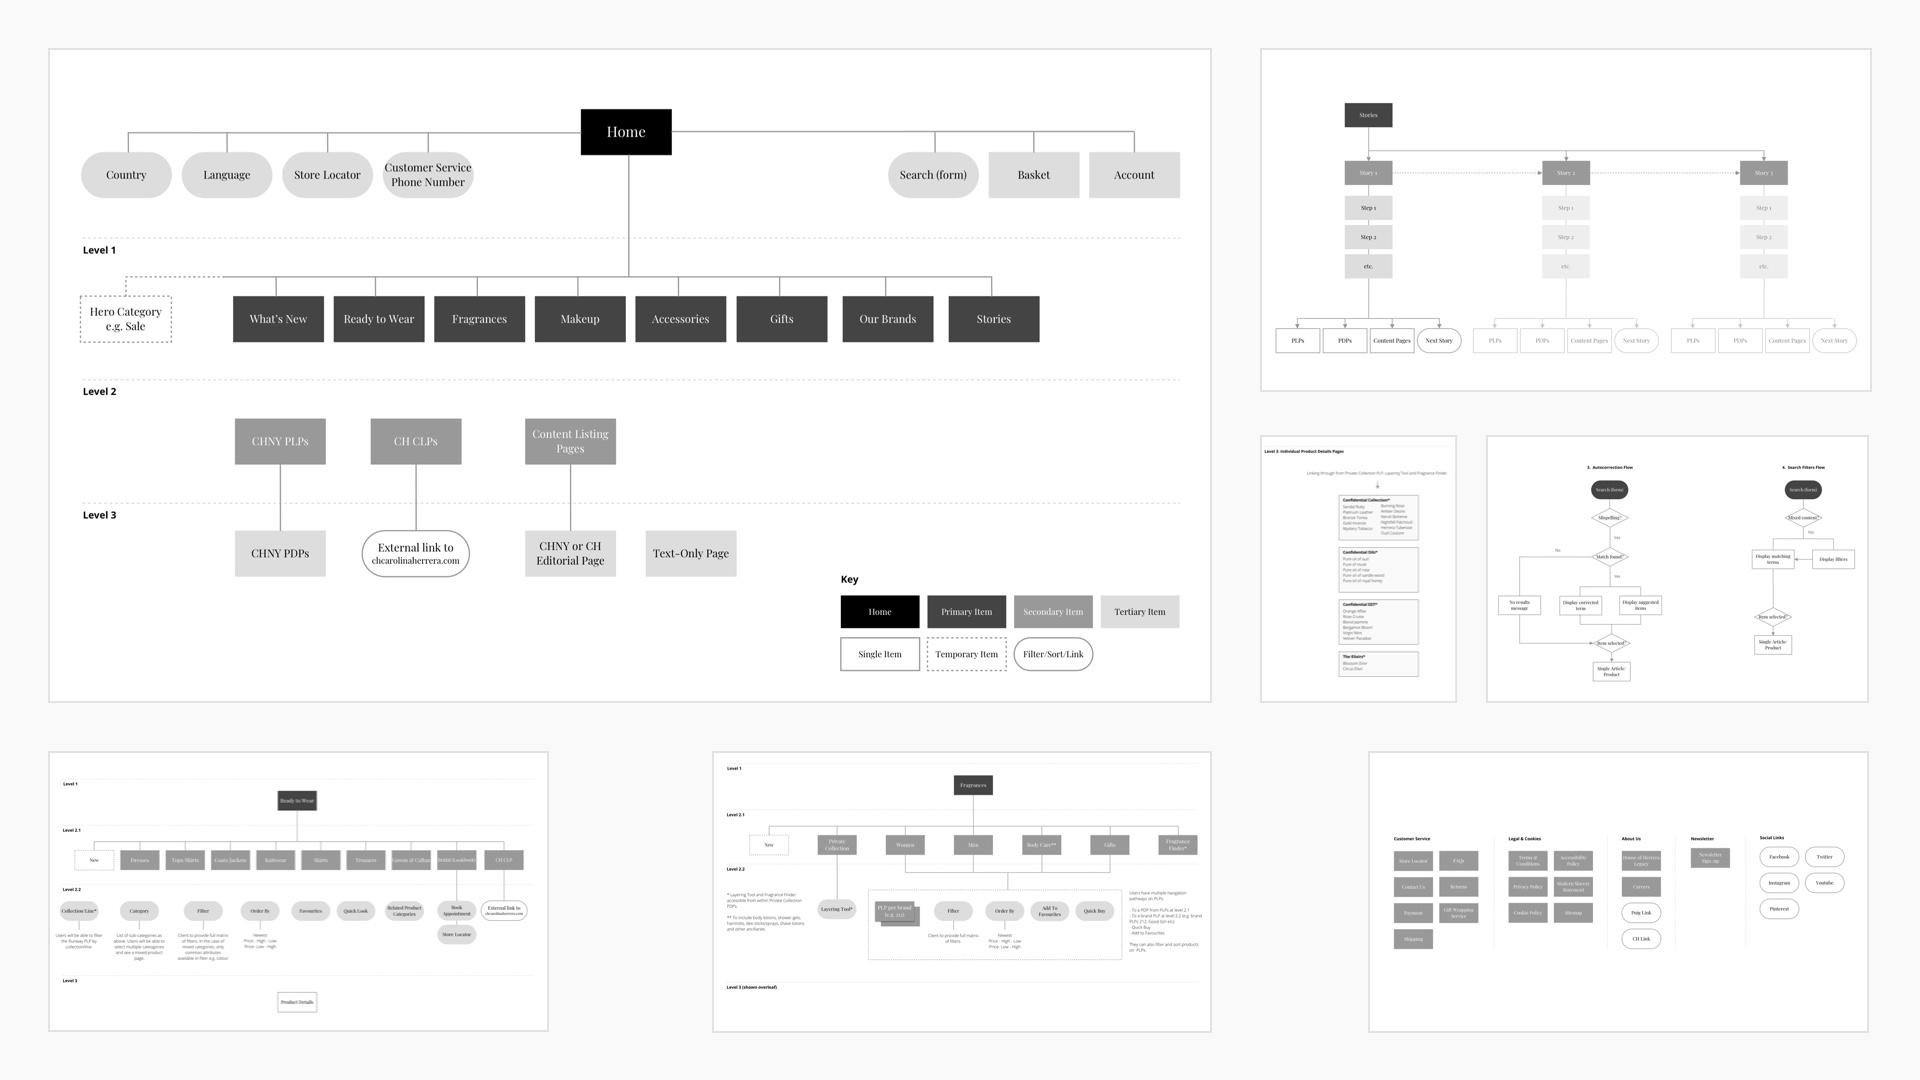 Sitemap showing key pages from the Carolina Herrera website